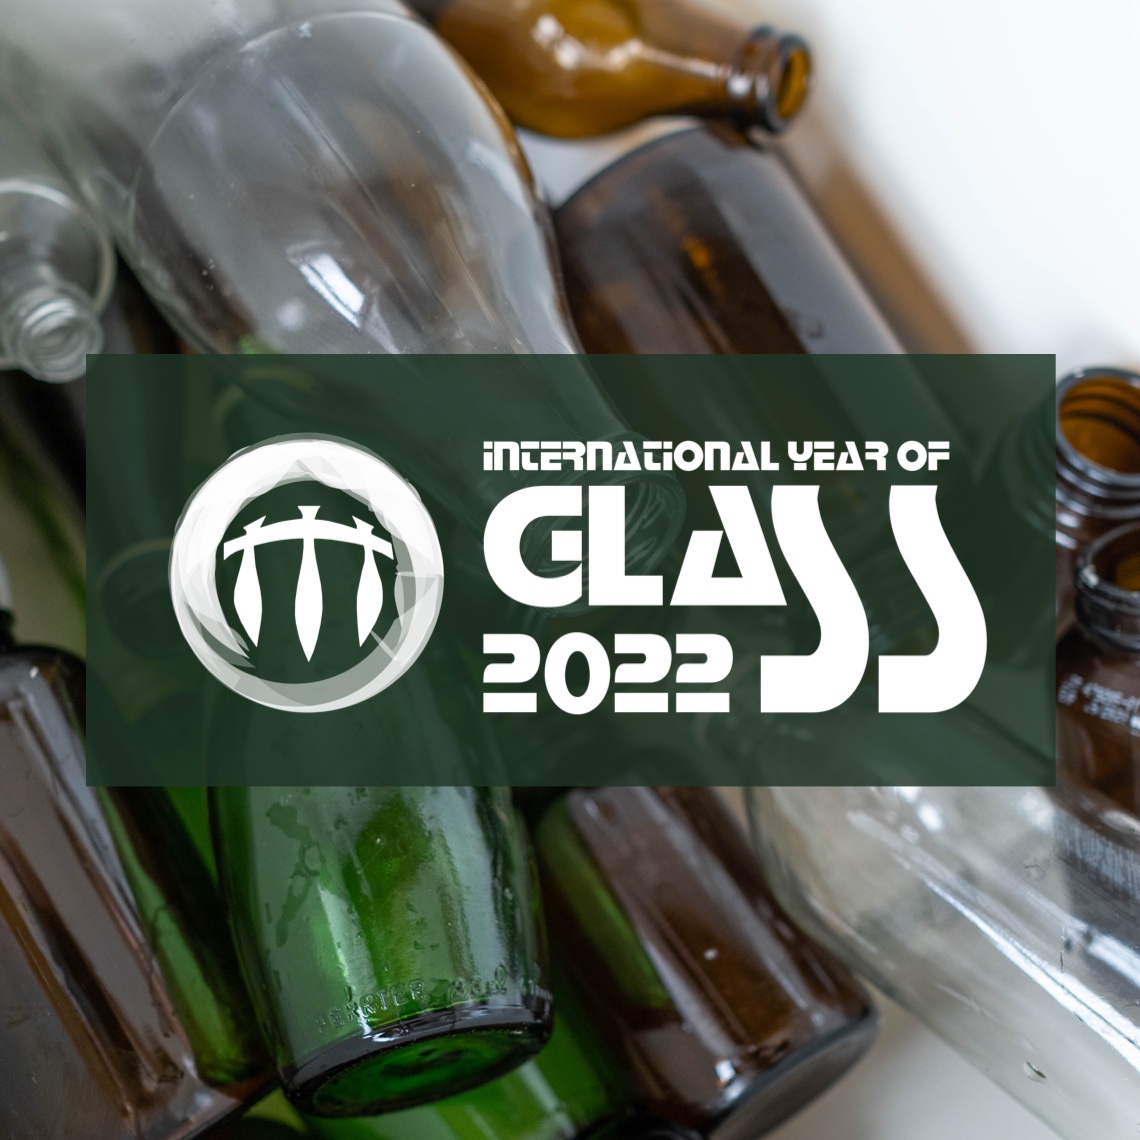 2022: glass packaging suppliers